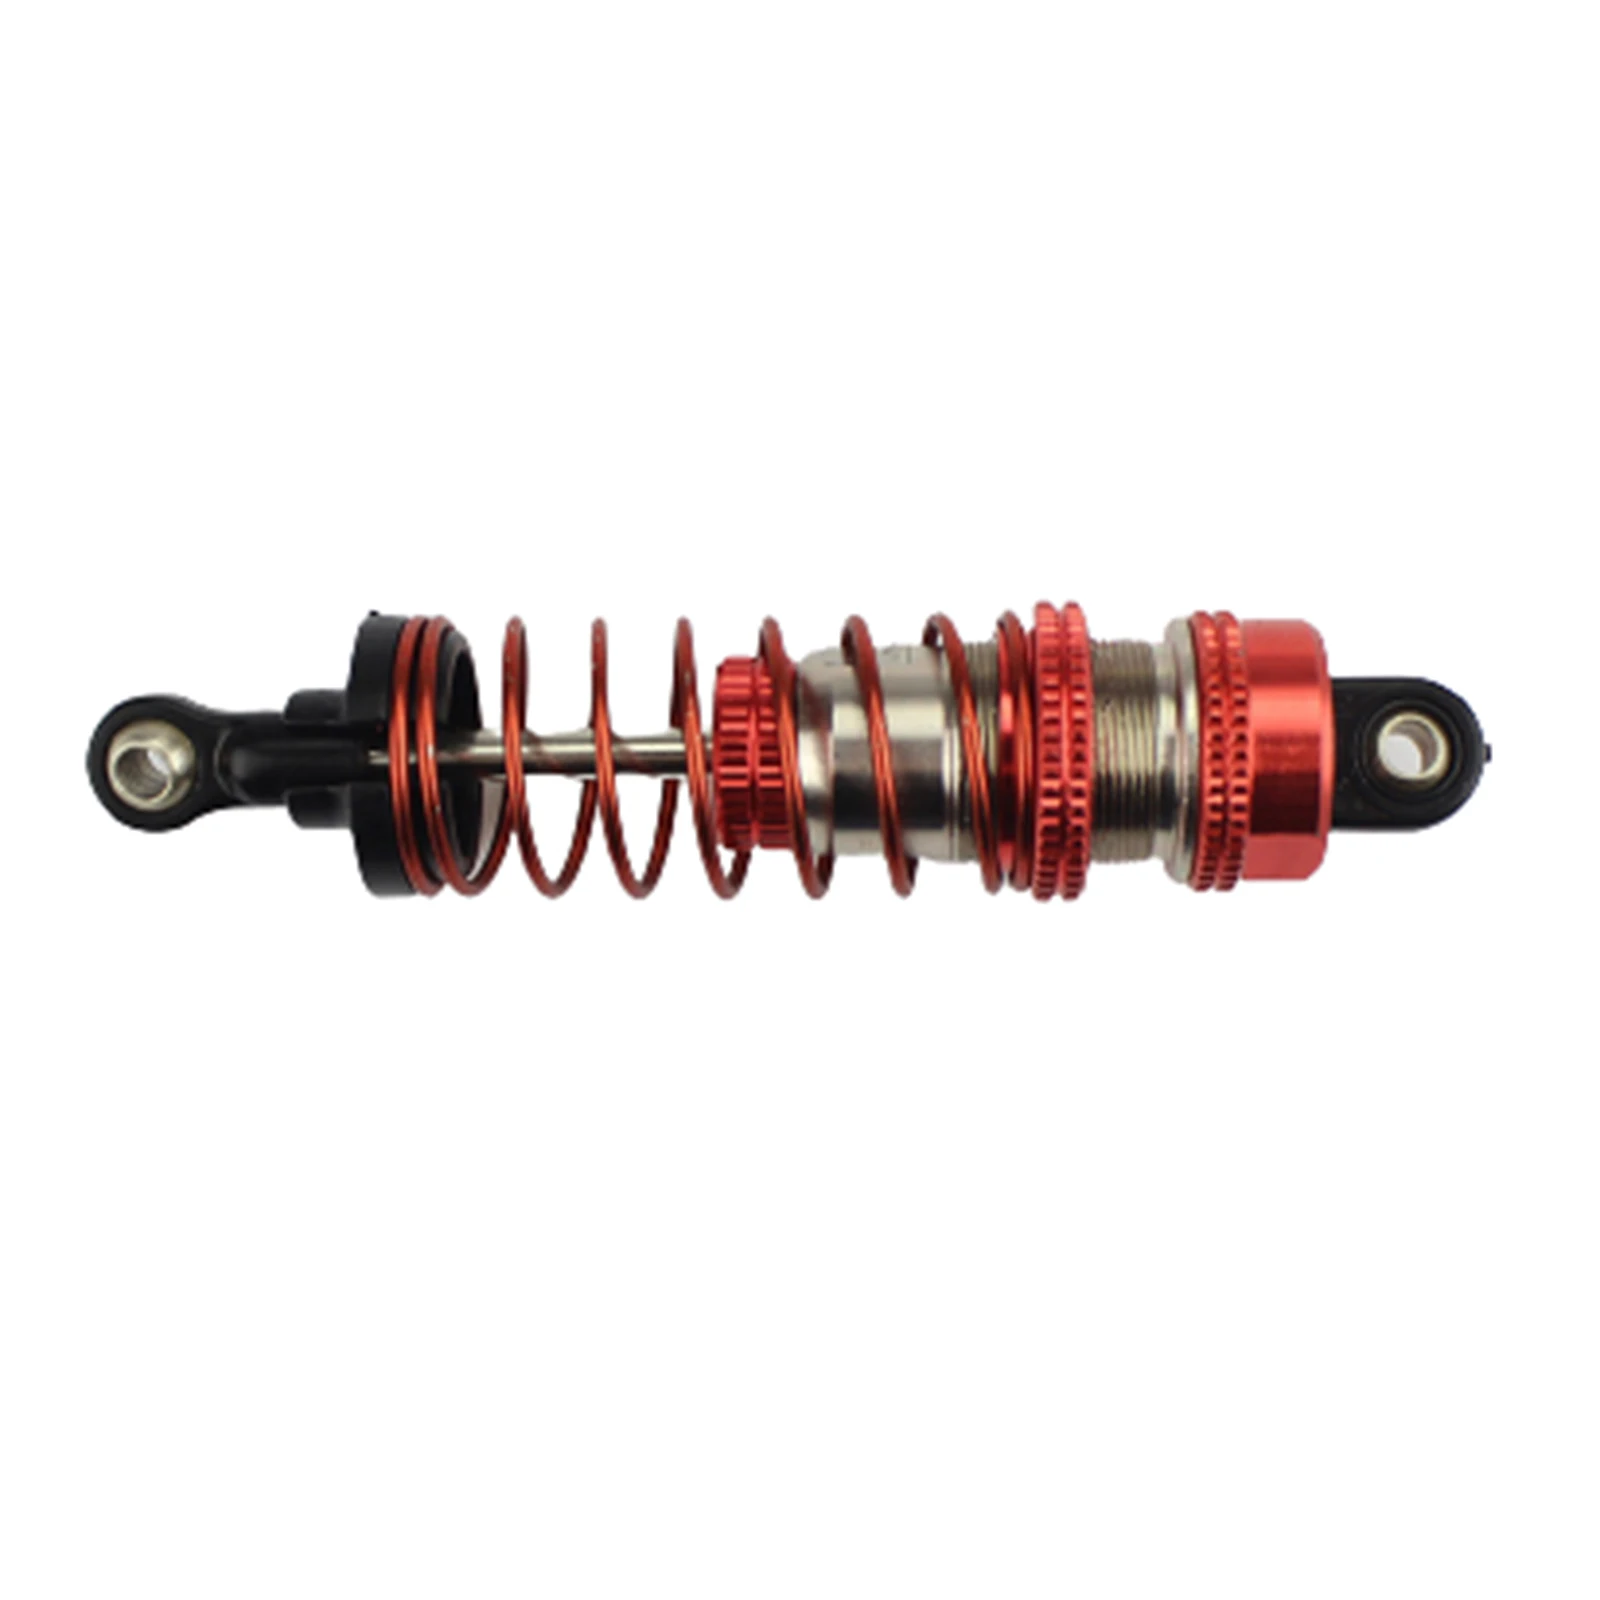 1 Pair Metal Shock Absorber Damper for 1/8 RC Car Spare Parts Accessory 120mm RC Car Shock Absorber 